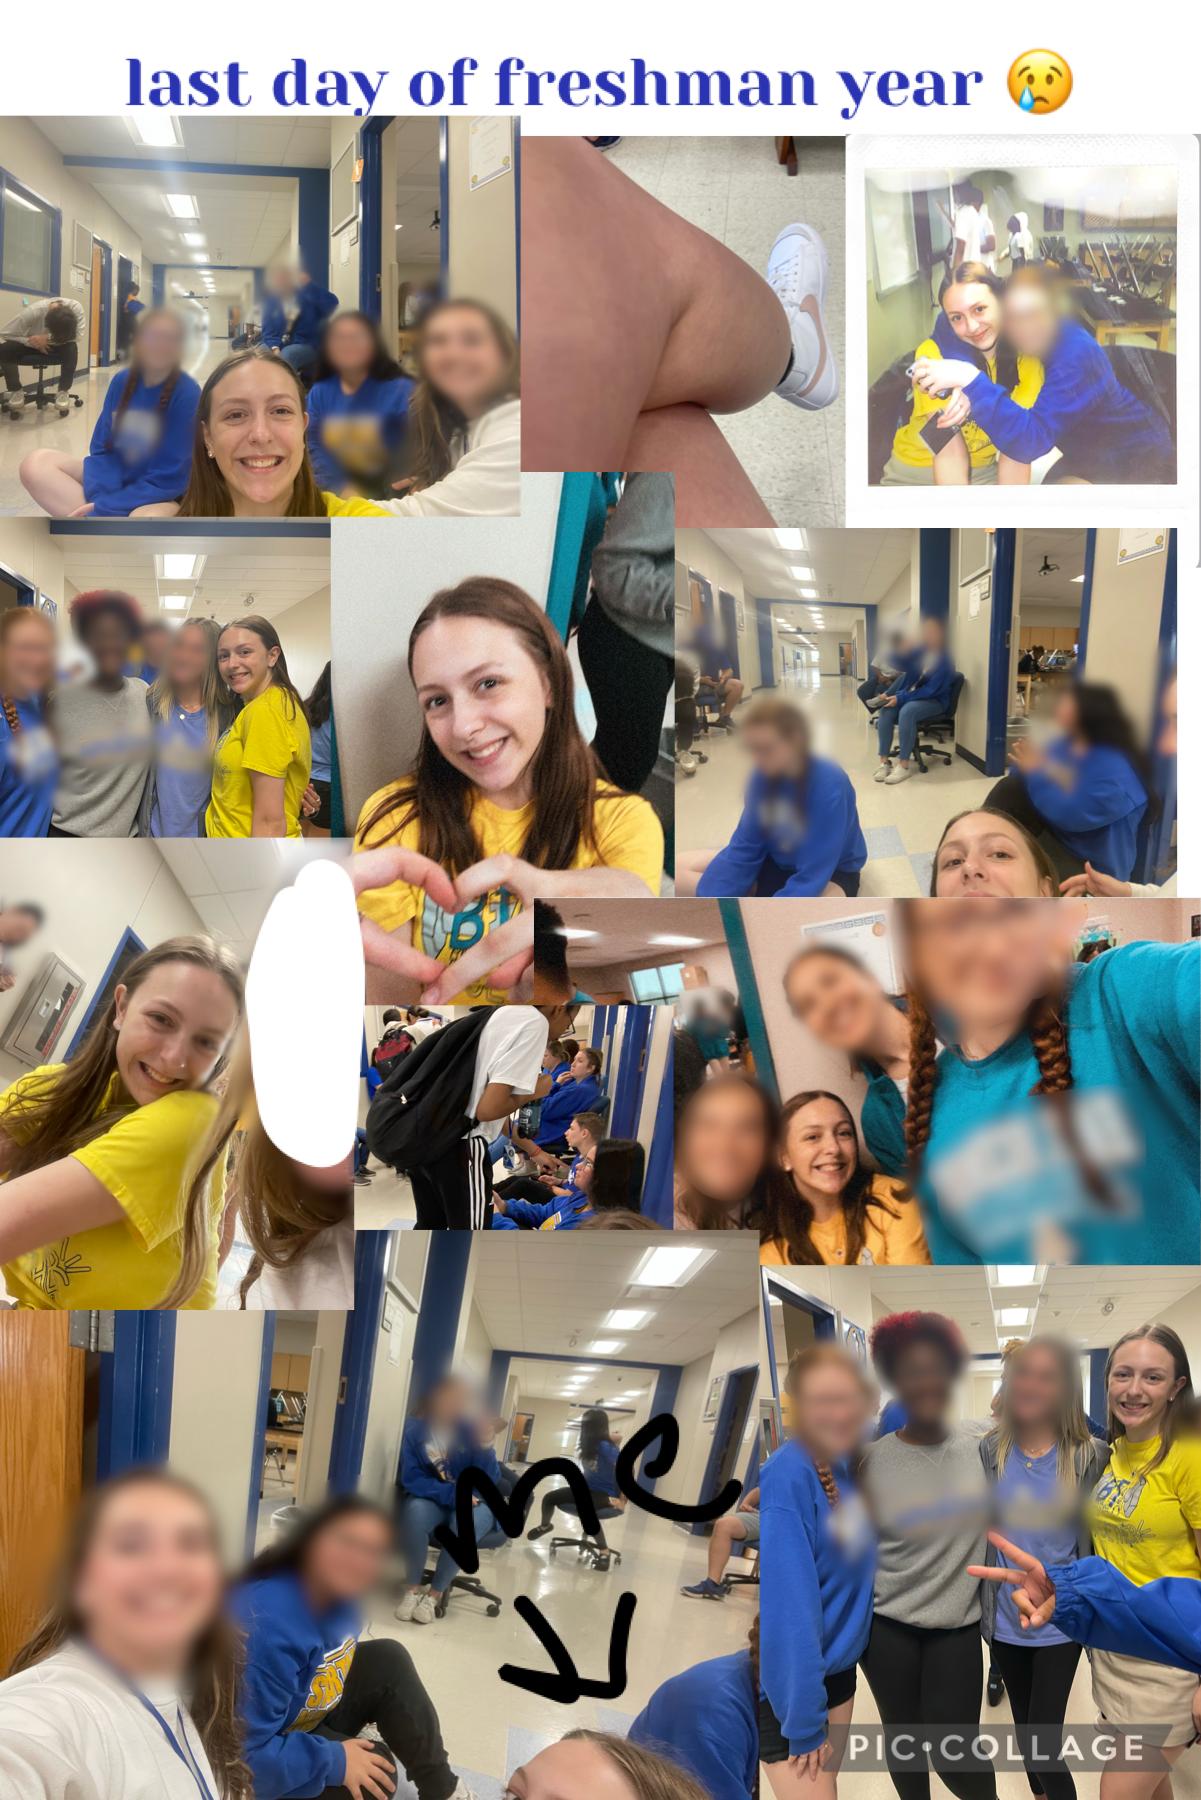 yesterday was my last day of freshman year 😢😢😢 this was the best year ever and i just wanted to say i love you guys sm thanks for keeping me entertained during boring classes 🥰🥰
class of 2025
(faces and logos blurred for privacy)